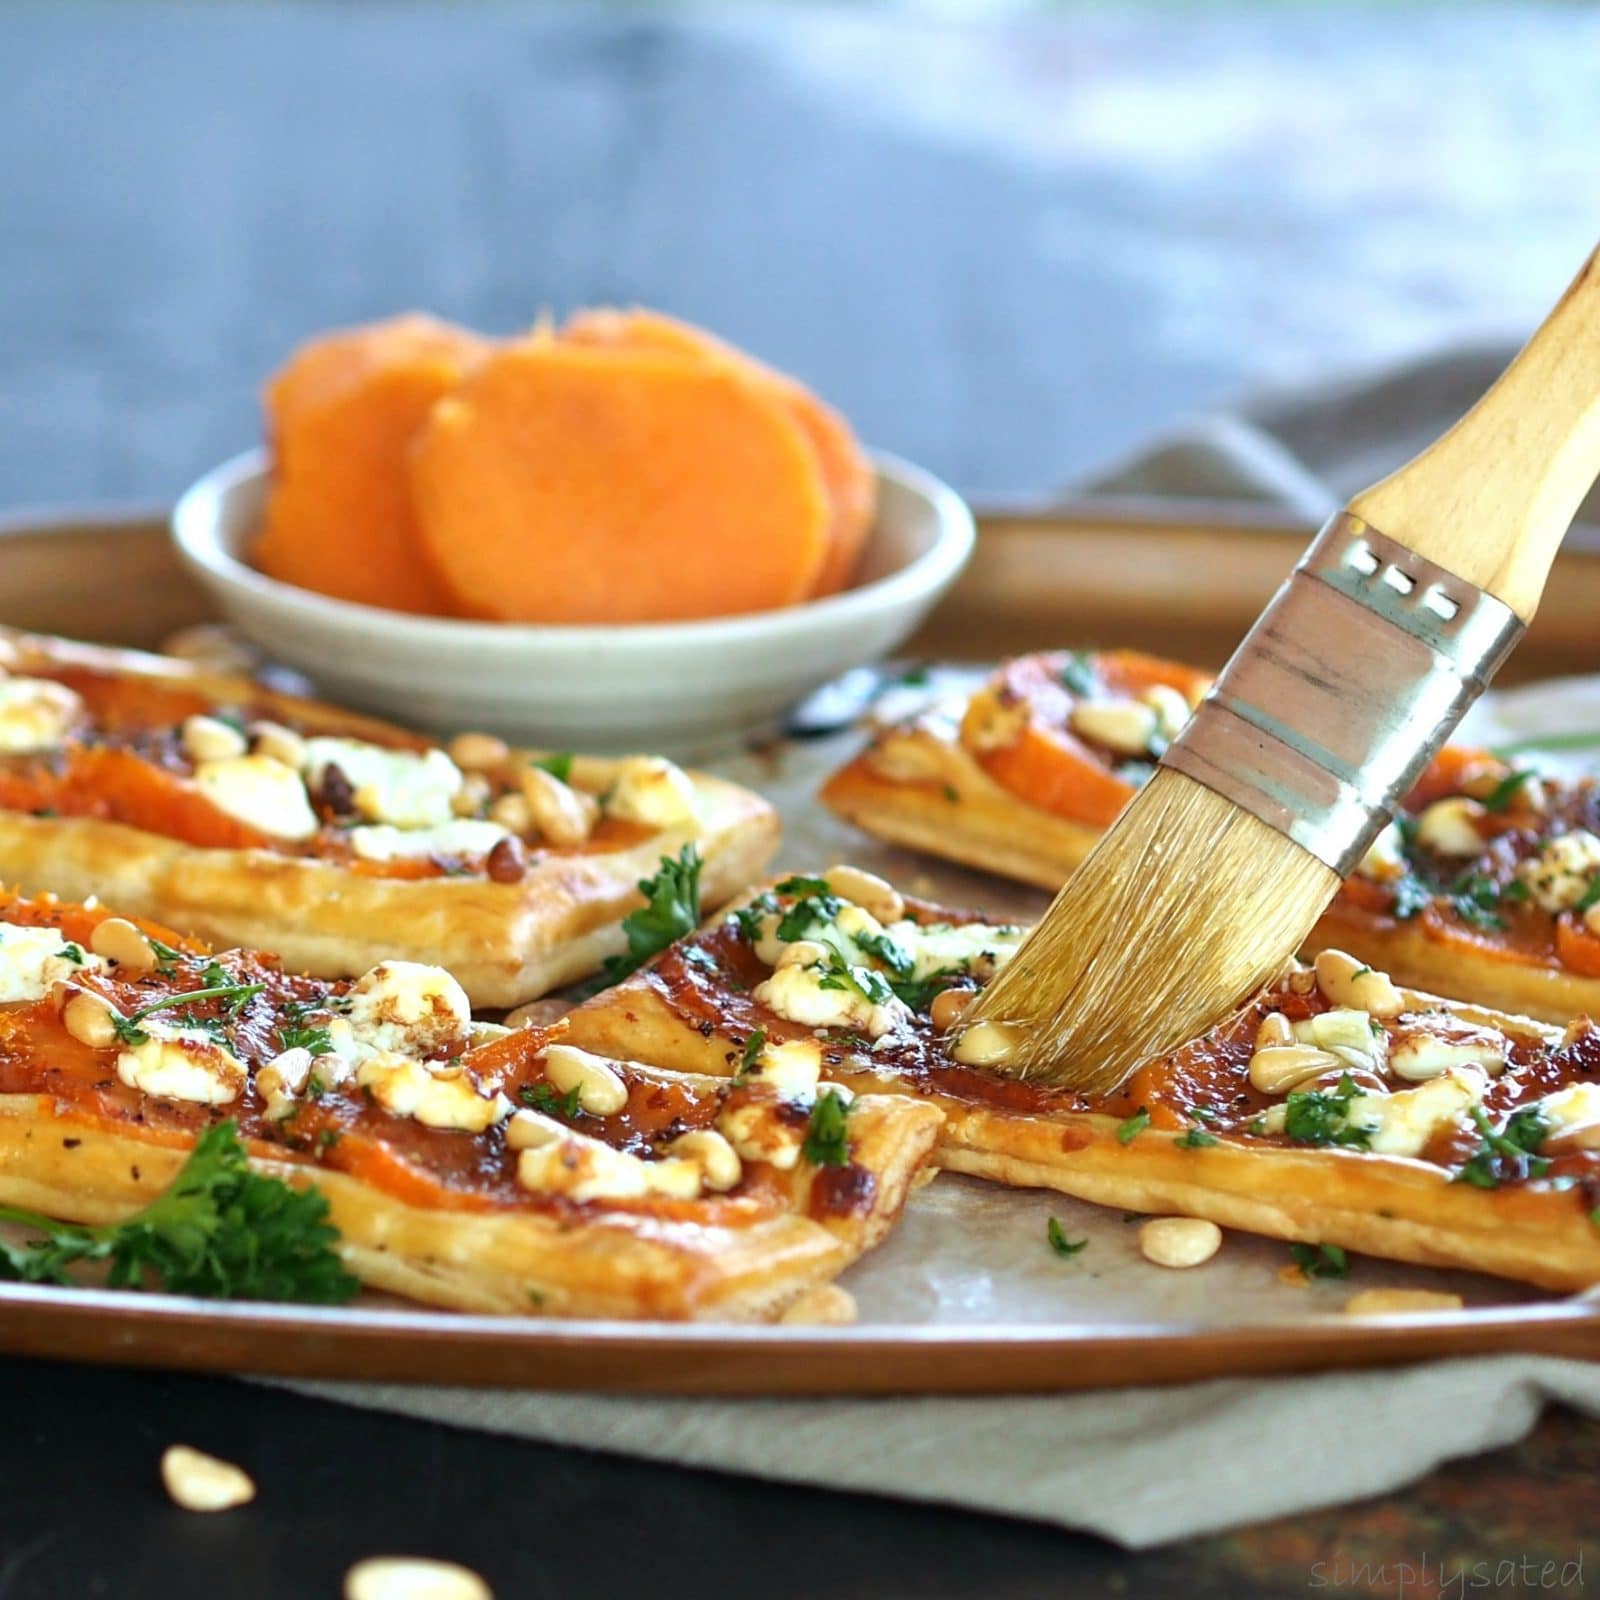 Sweet Potato & Honey Goat Cheese Pizza is just as delicious made with freshly baked sweet potatoes or even leftover sweet potatoes from Thanksgiving.